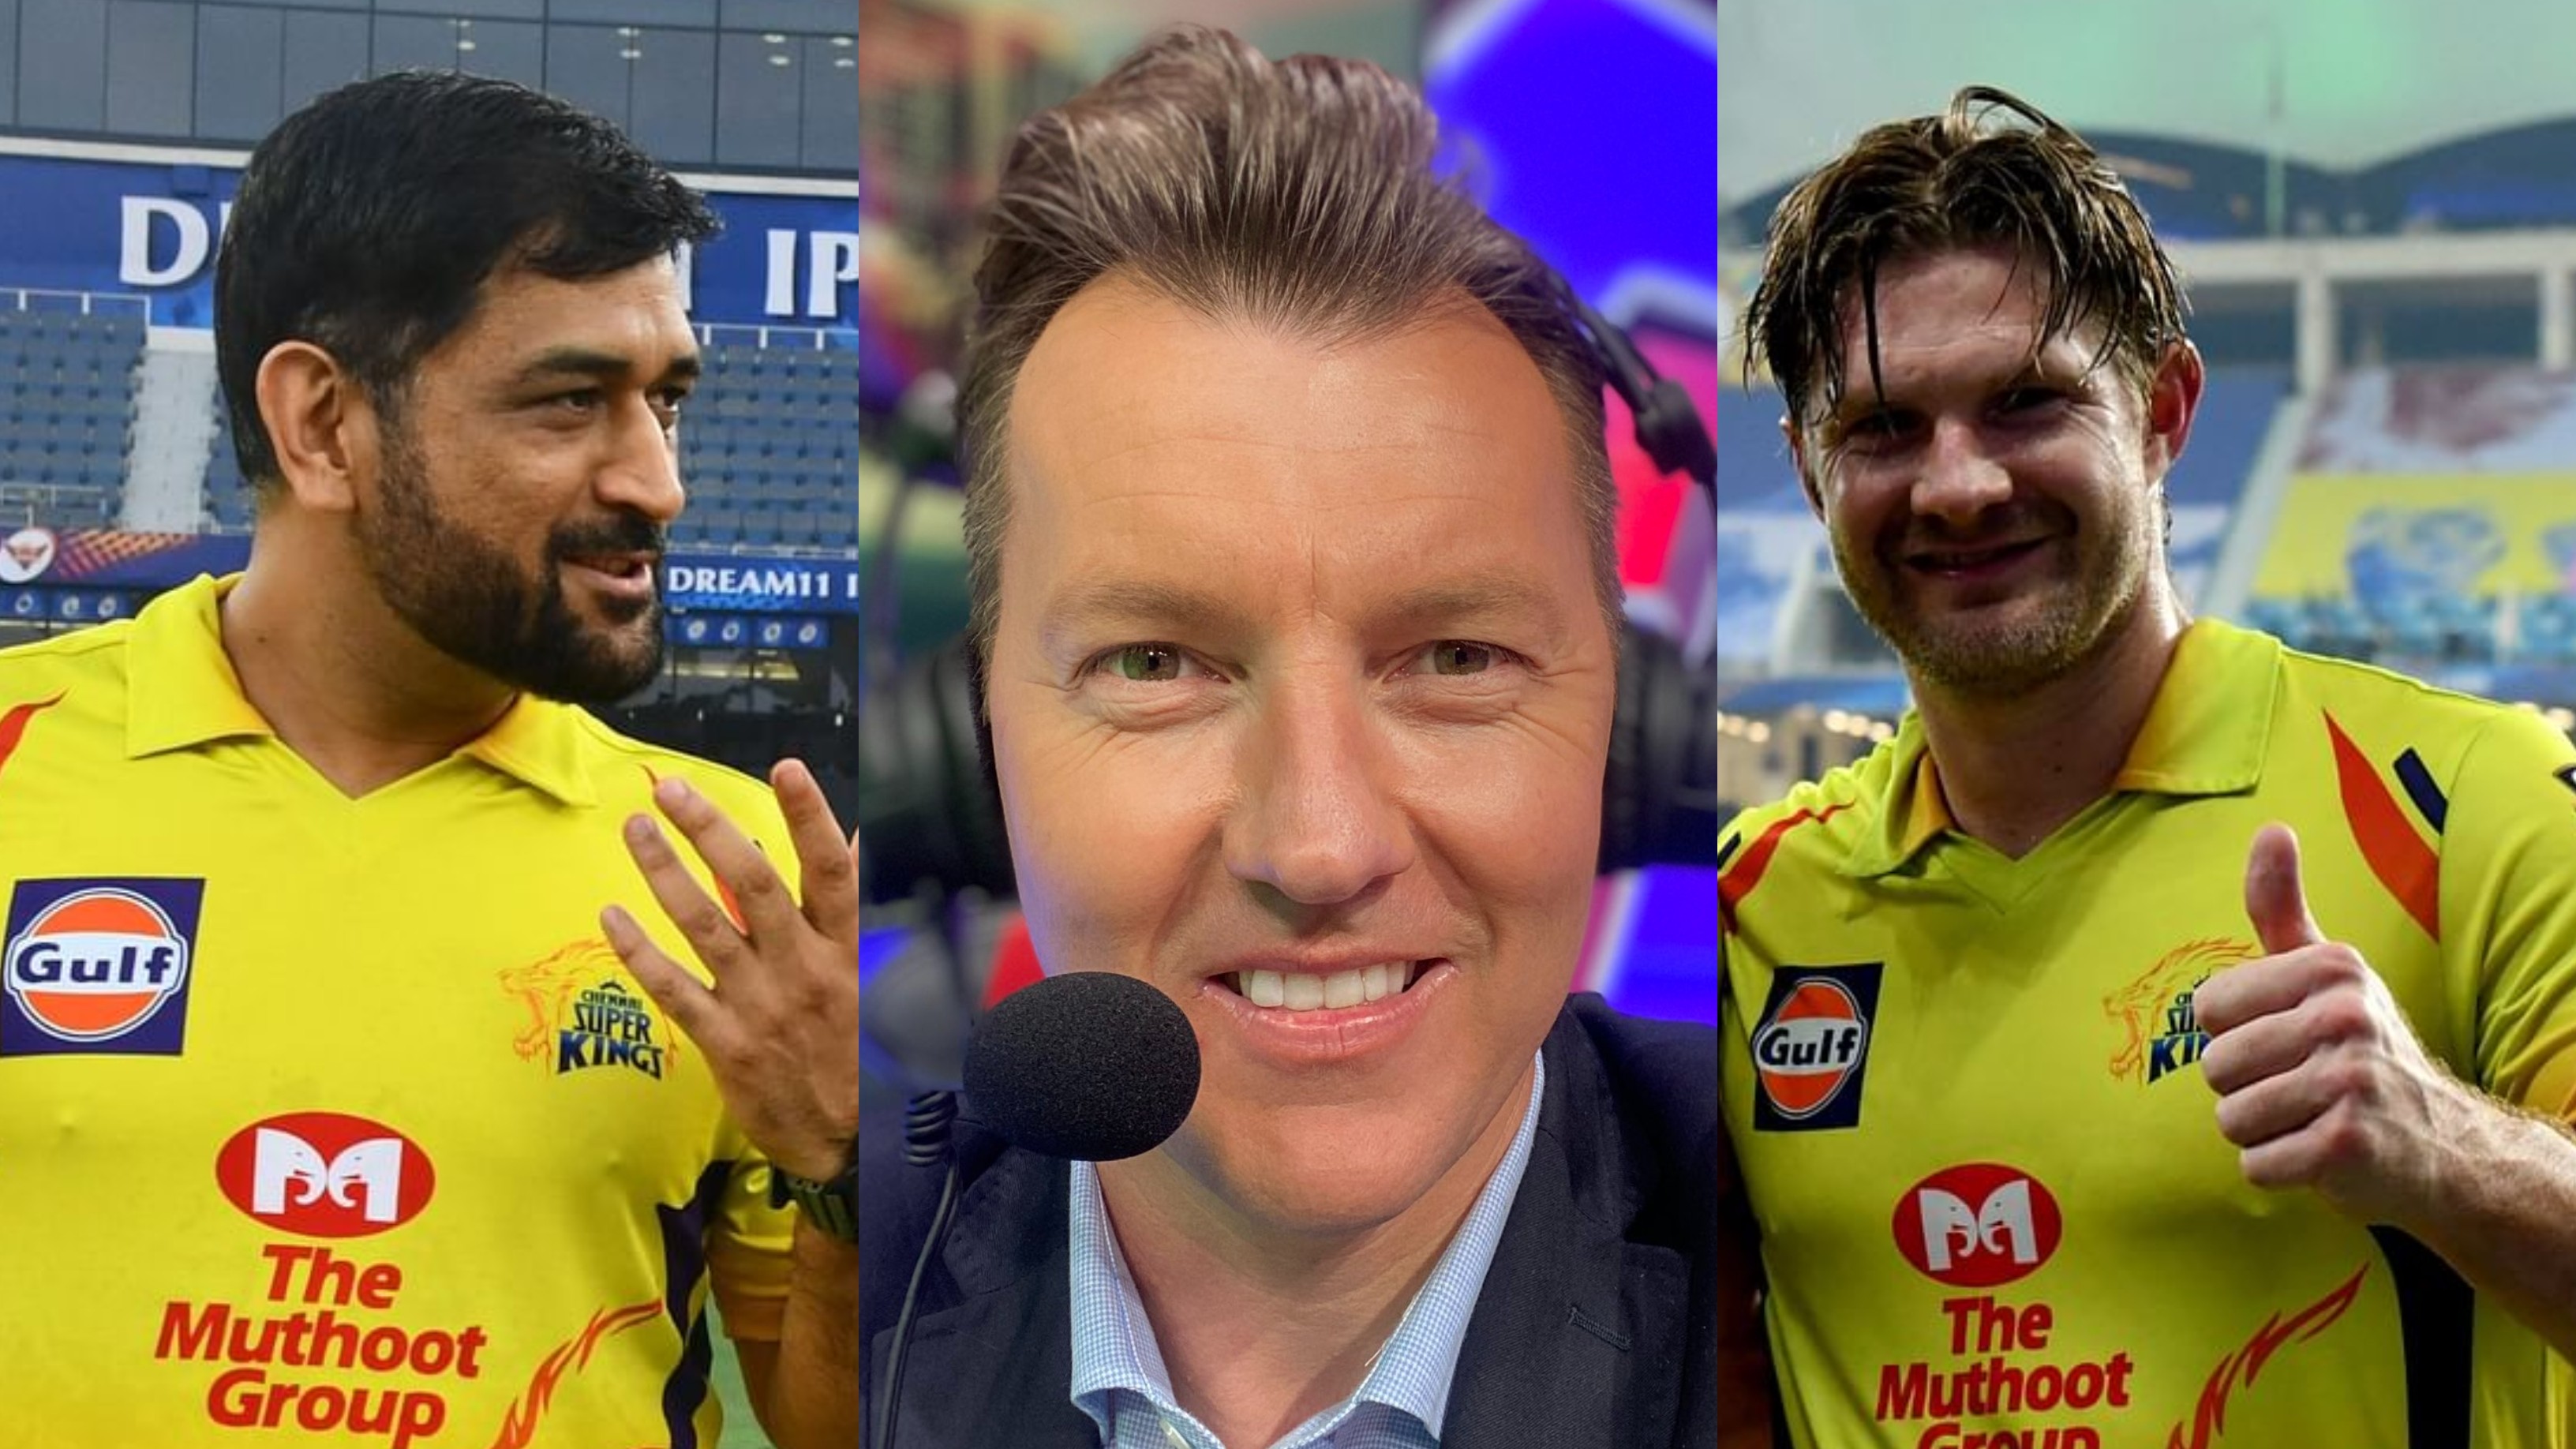 IPL 2020: Hats off to MS Dhoni for keeping faith in Shane Watson, says Brett Lee 